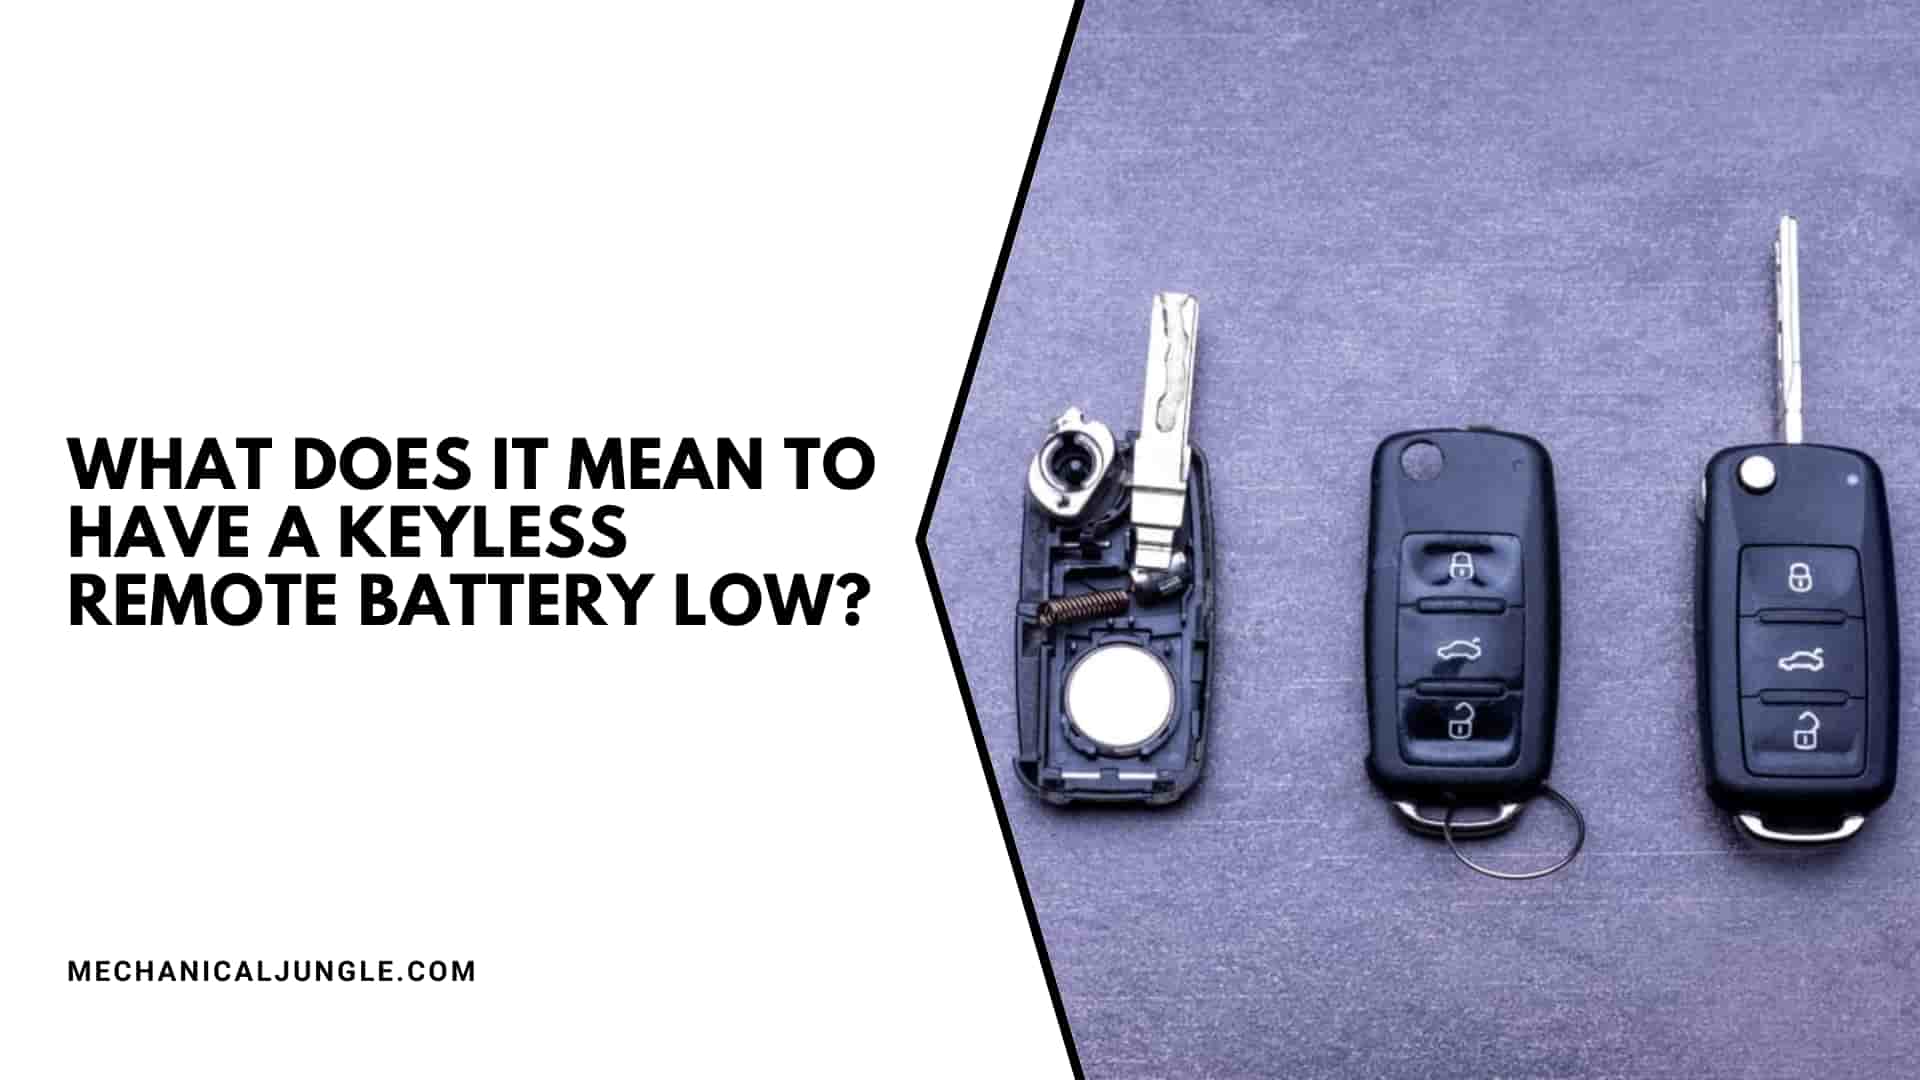 What Does It Mean to Have a Keyless Remote Battery Low?